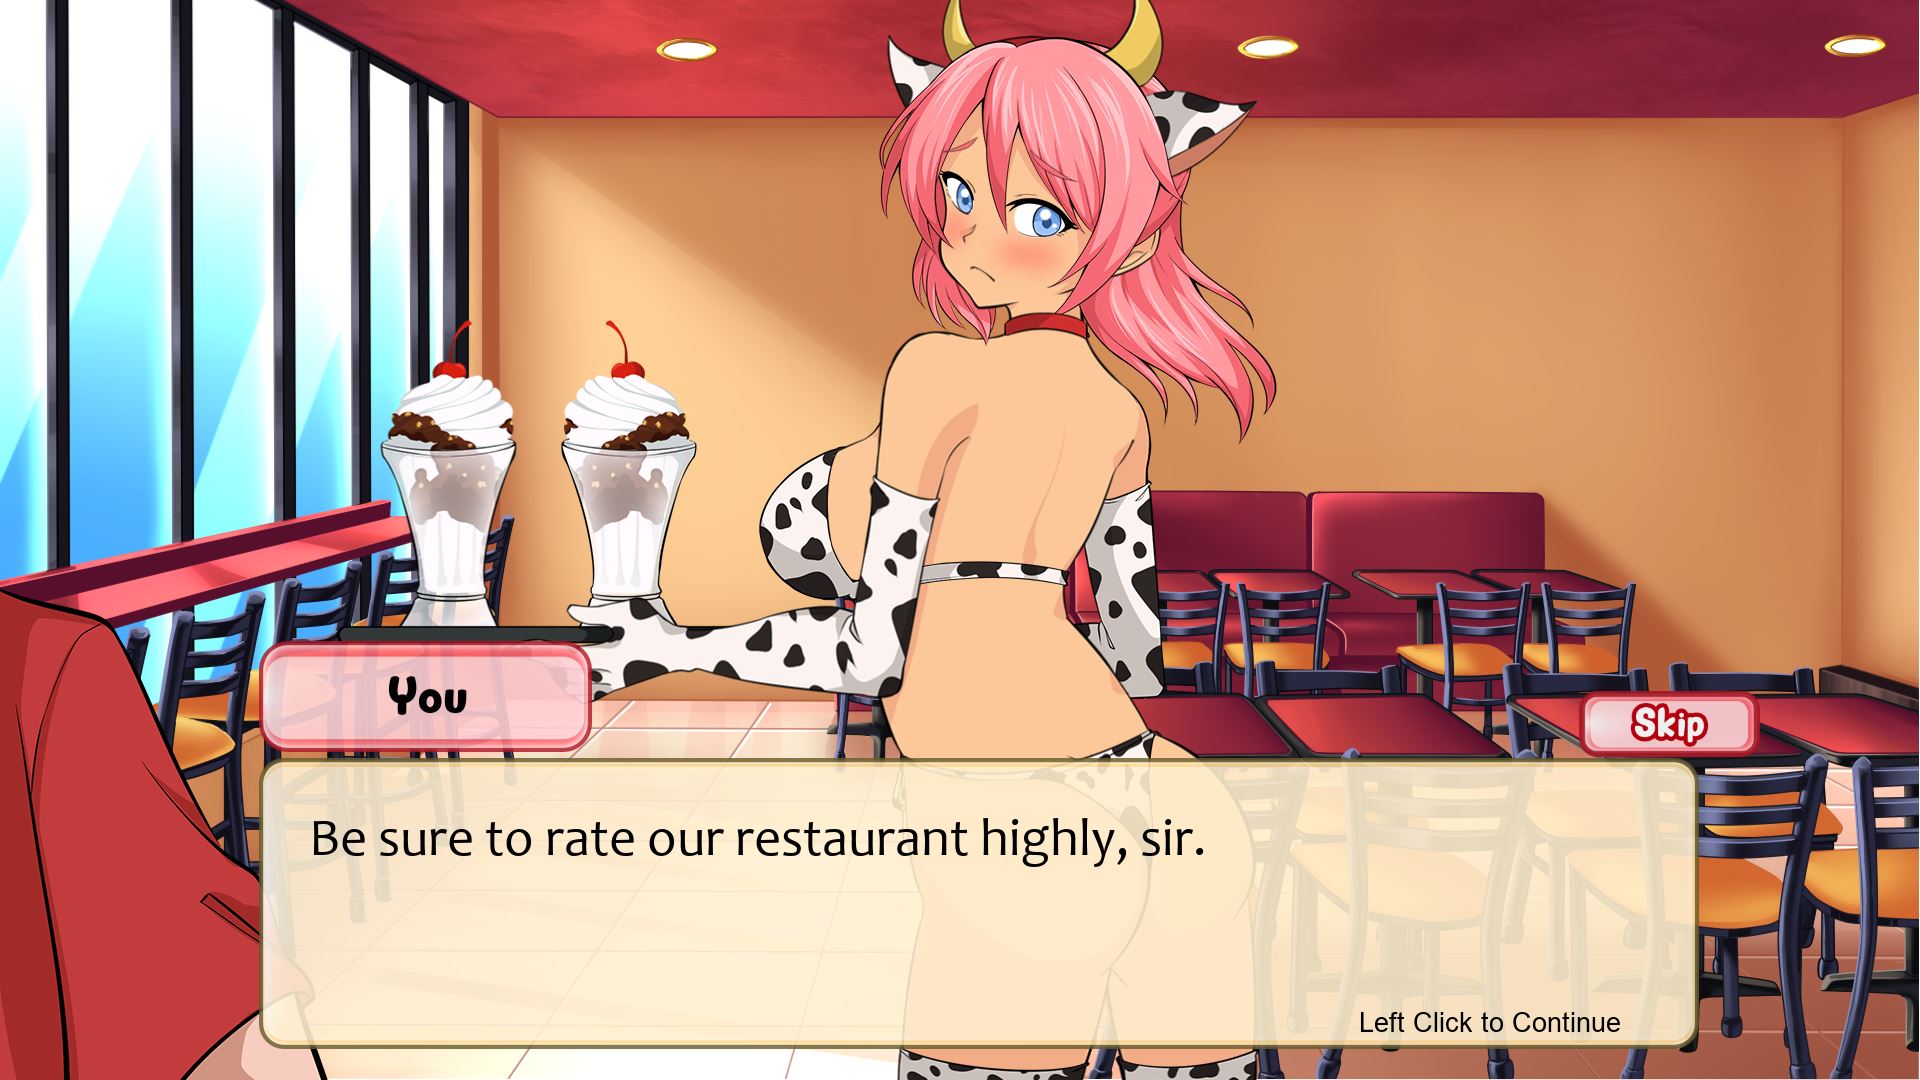 1920px x 1080px - Hire Me, Fuck Me, Give Me a Raise! Fast Food 3 Others Porn Sex Game v.0.1.2  Download for Windows, MacOS, Android